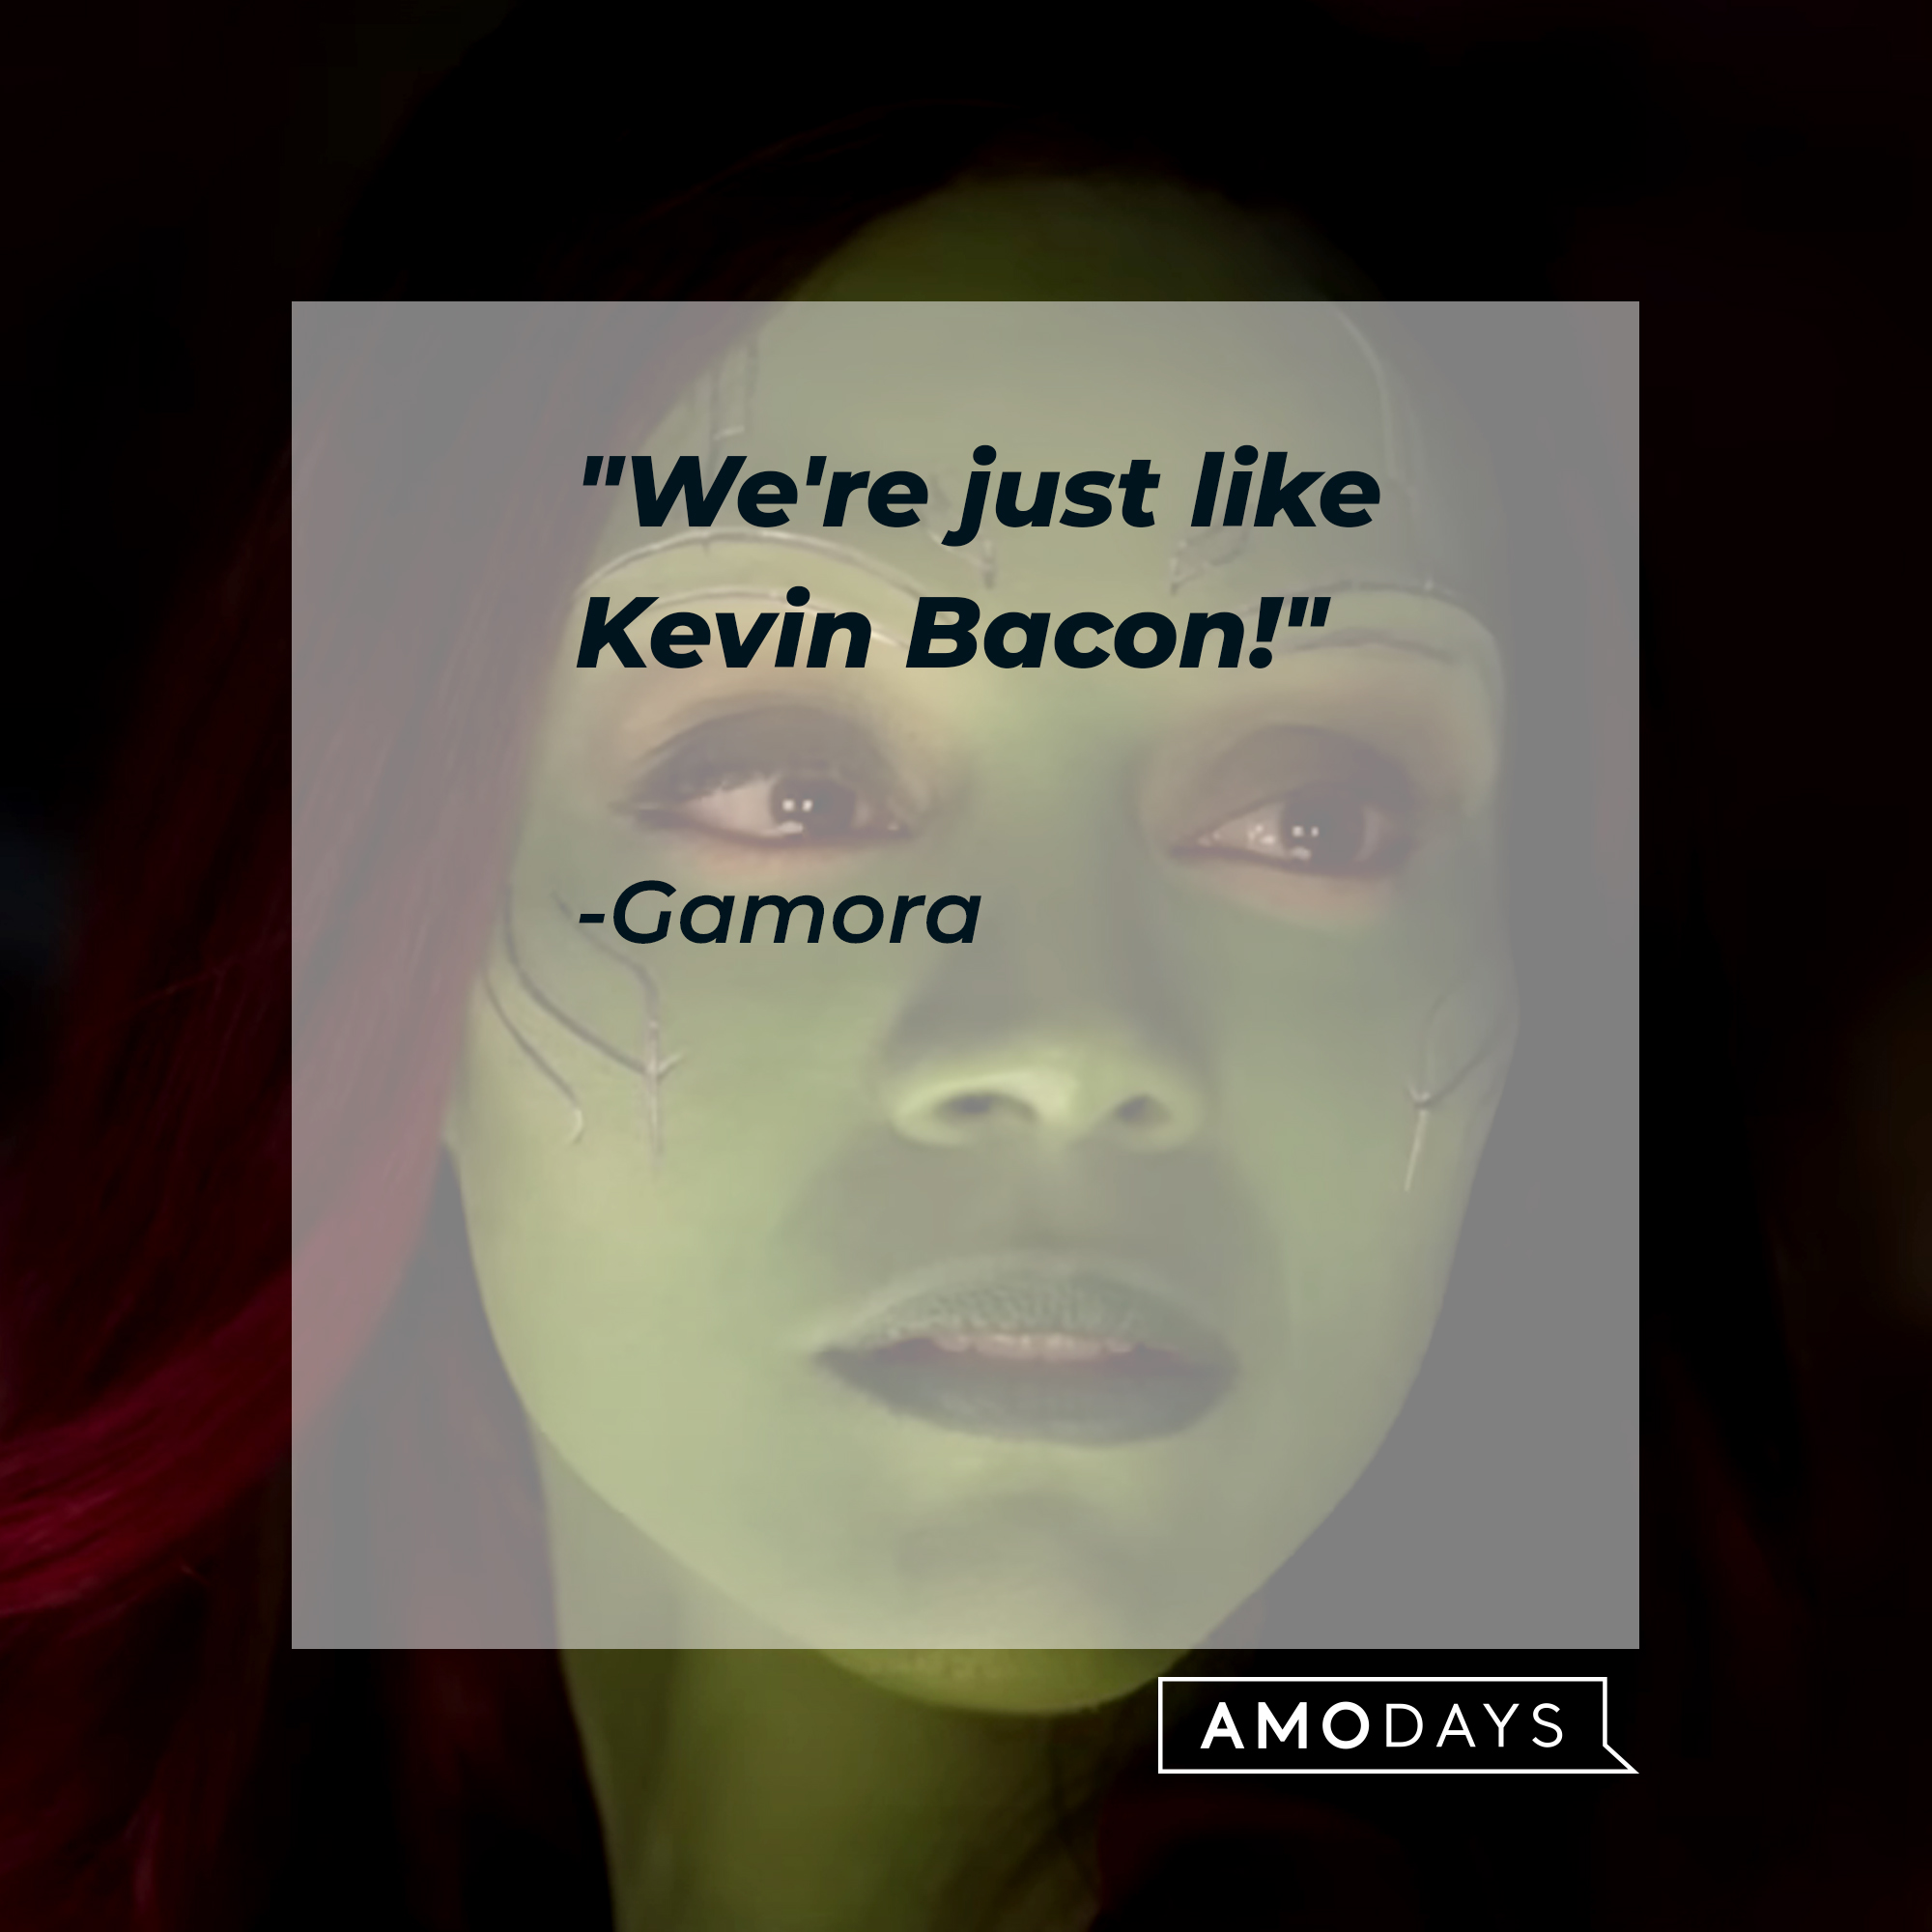 Gamora's quote, "We're just like Kevin Bacon!" | Image: youtube.com/marvel